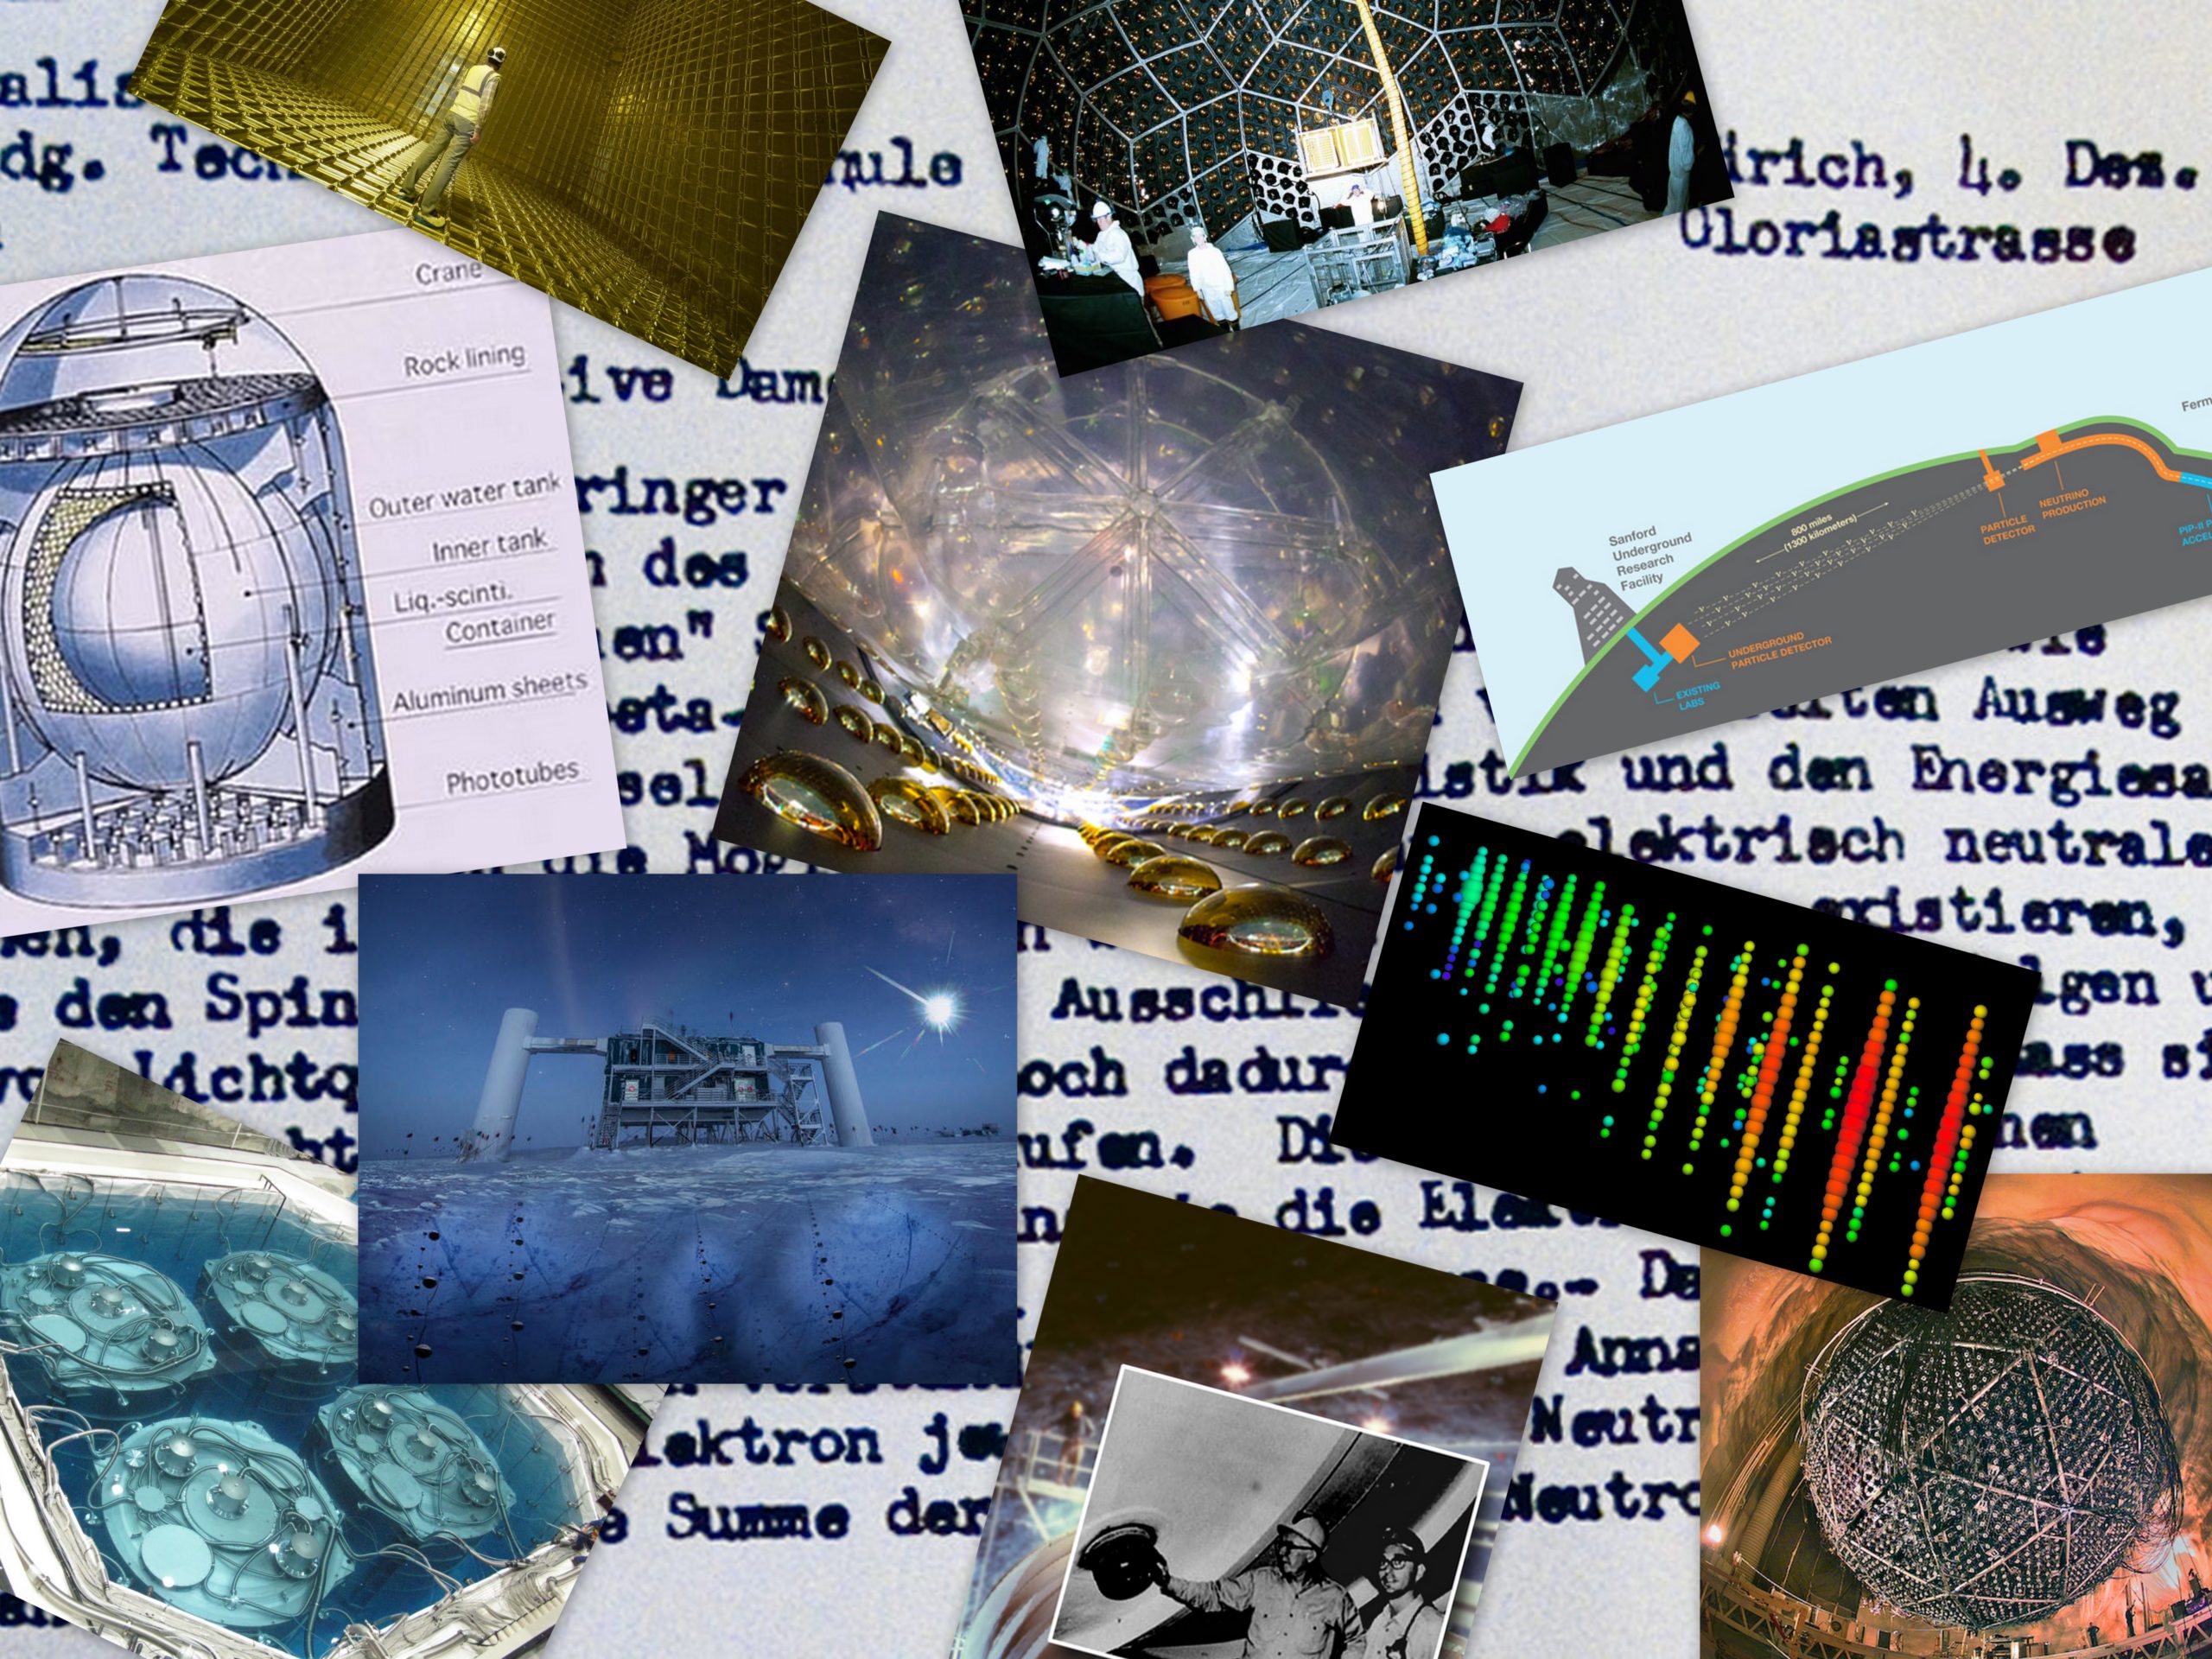 Collage - A collection of images from past, present, and pending neutrino science experiments, including: Daya Bay, DUNE at LBNF, the Homestake experiment, IceCube, KamLAND, ProtoDUNE and SNO. Displayed in the background is the text of a letter that physicist Wolfgang Pauli had written on Dec. 4, 1930, postulating the existence of the neutrino.